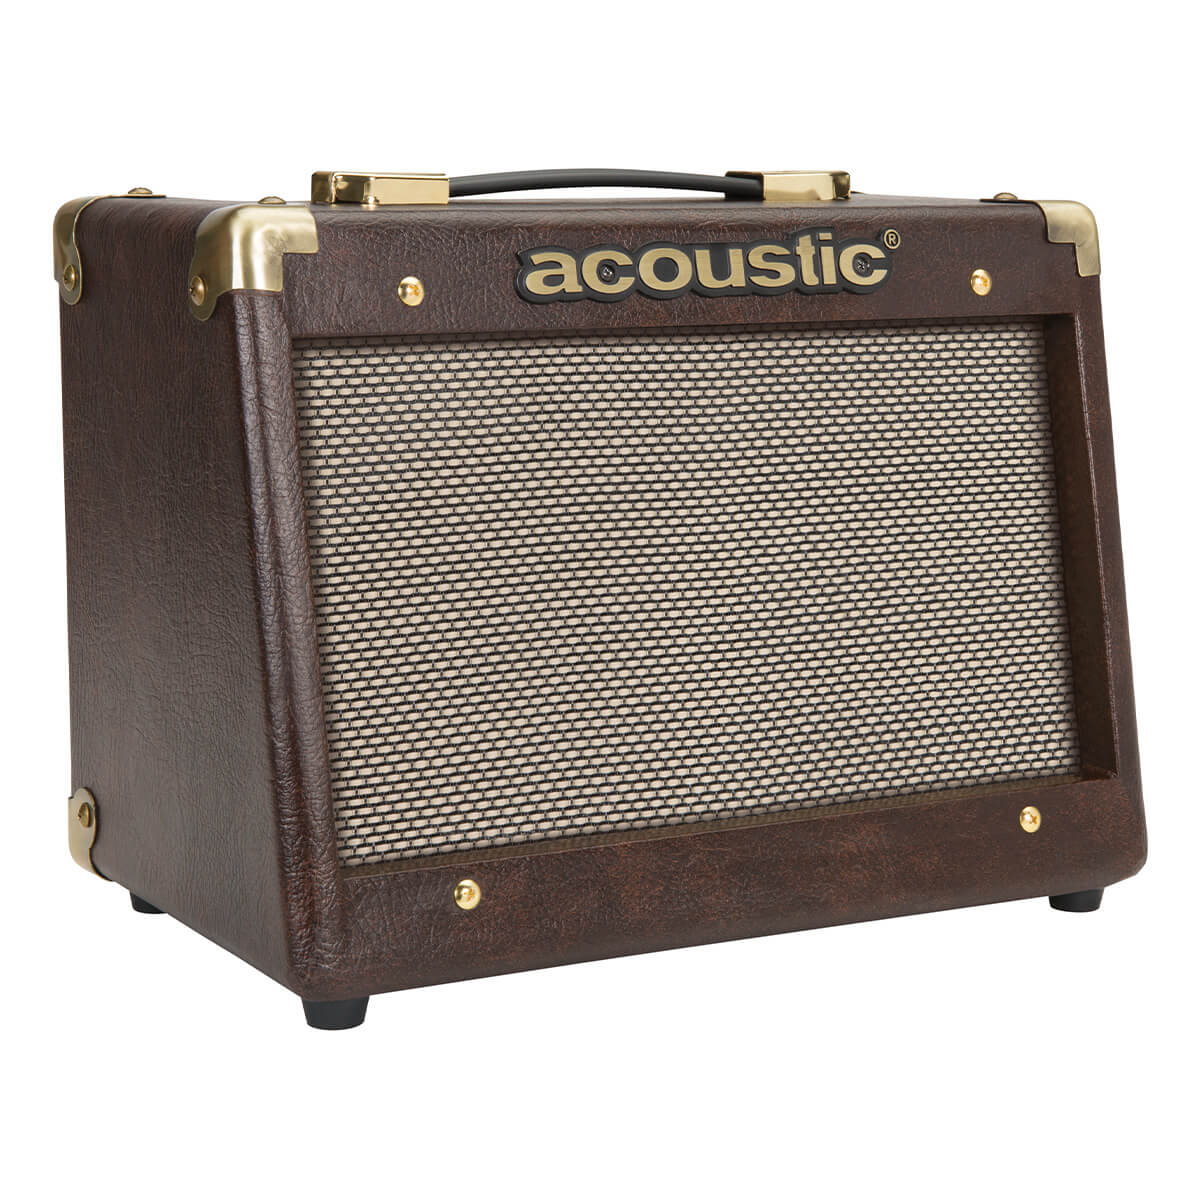 Left perspective view of Acoustic A15 15W Acoustic Instrument Amp